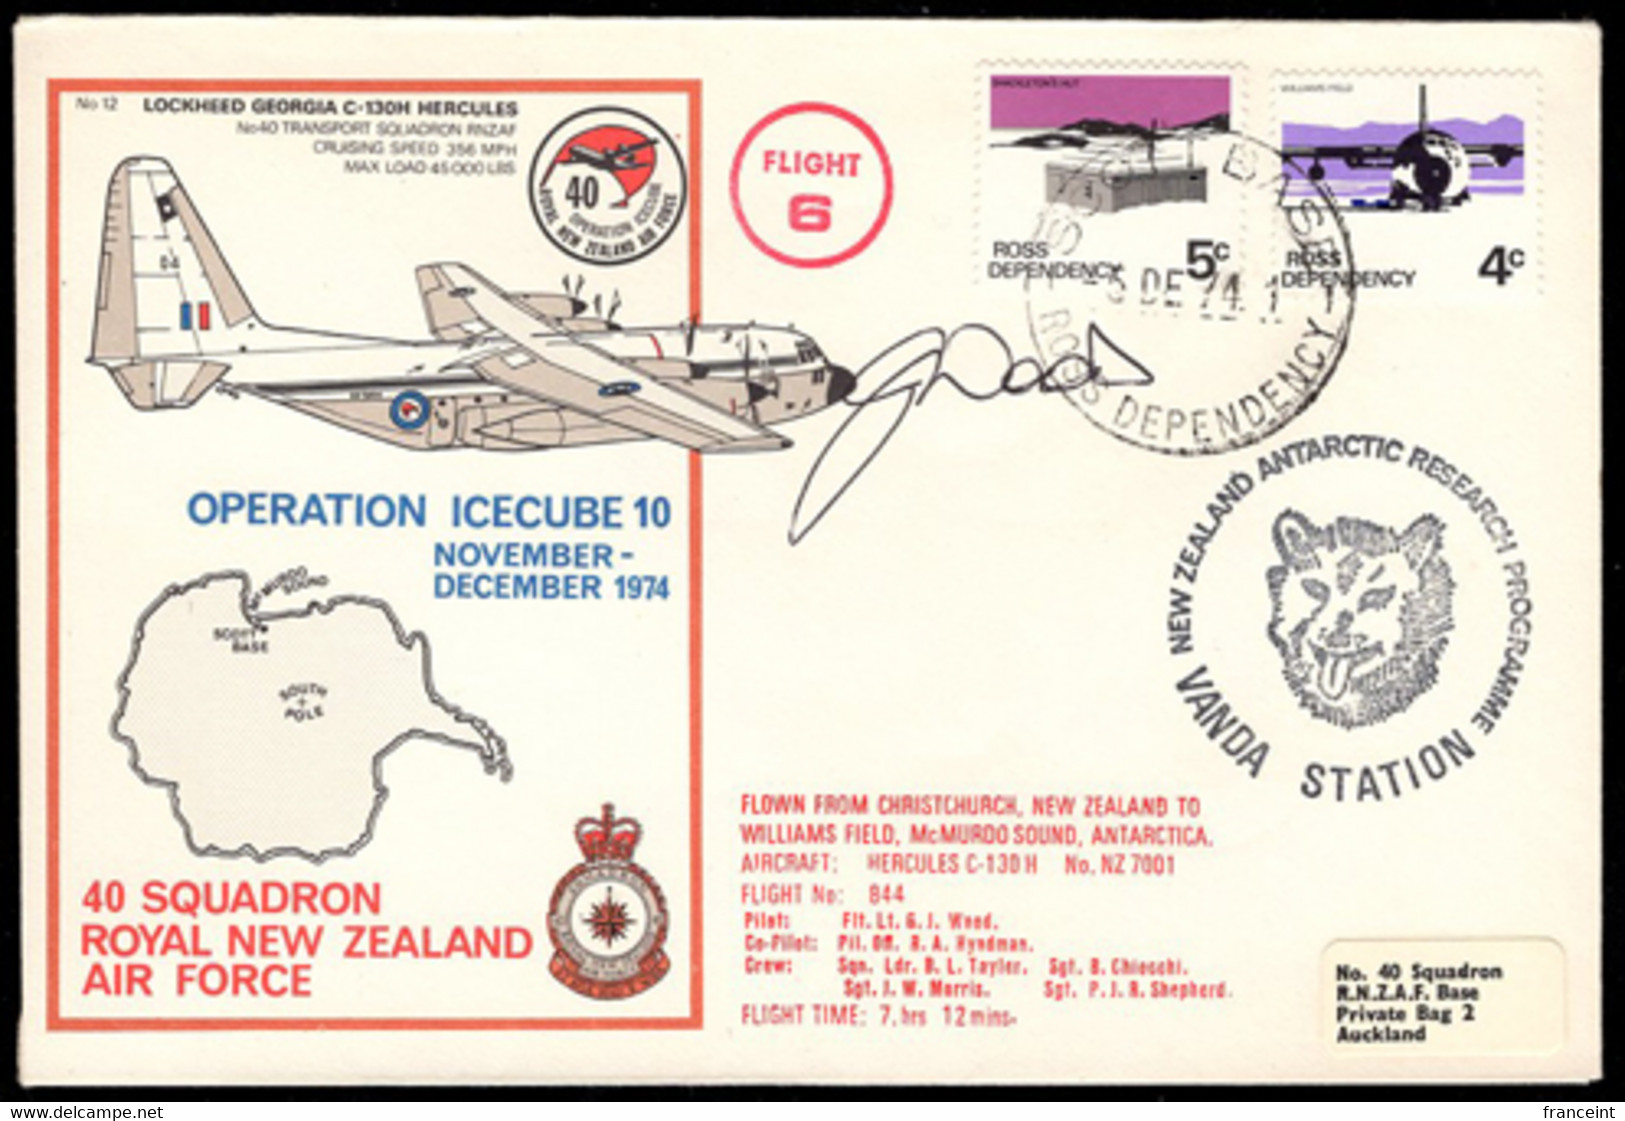 ROSS DEPENDENCY(1974) Husky. Illustrated Cover With Multiple Handstamps From Vanda Station. Flight #6. Op IceCube 10 - Covers & Documents